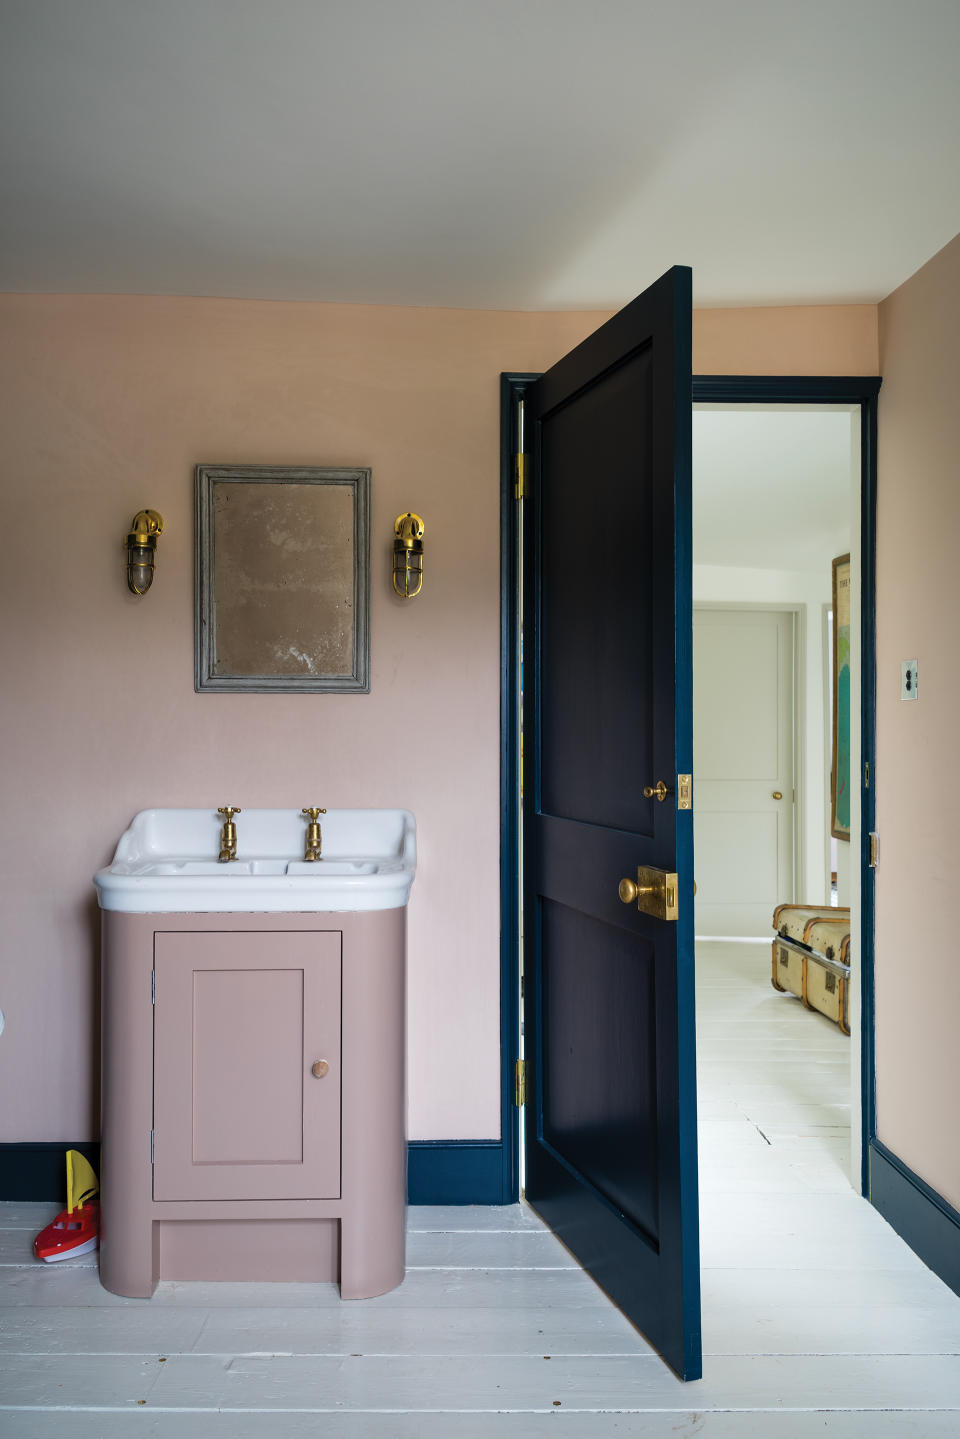 <p> &apos;If your traditional bathroom is large, then any color goes but by painting a light tone will enhance the luxury of space, so perhaps save the deeper shades for accents such as the bath panel or door.&apos; says Farrow &amp; Ball says Charlotte Cosby, head of creative at Farrow &amp; Ball&#xA0; </p> <p> &apos;Dark colors work particularly well for a small traditional bathroom as it will make the room feel more intimate.&apos; </p>